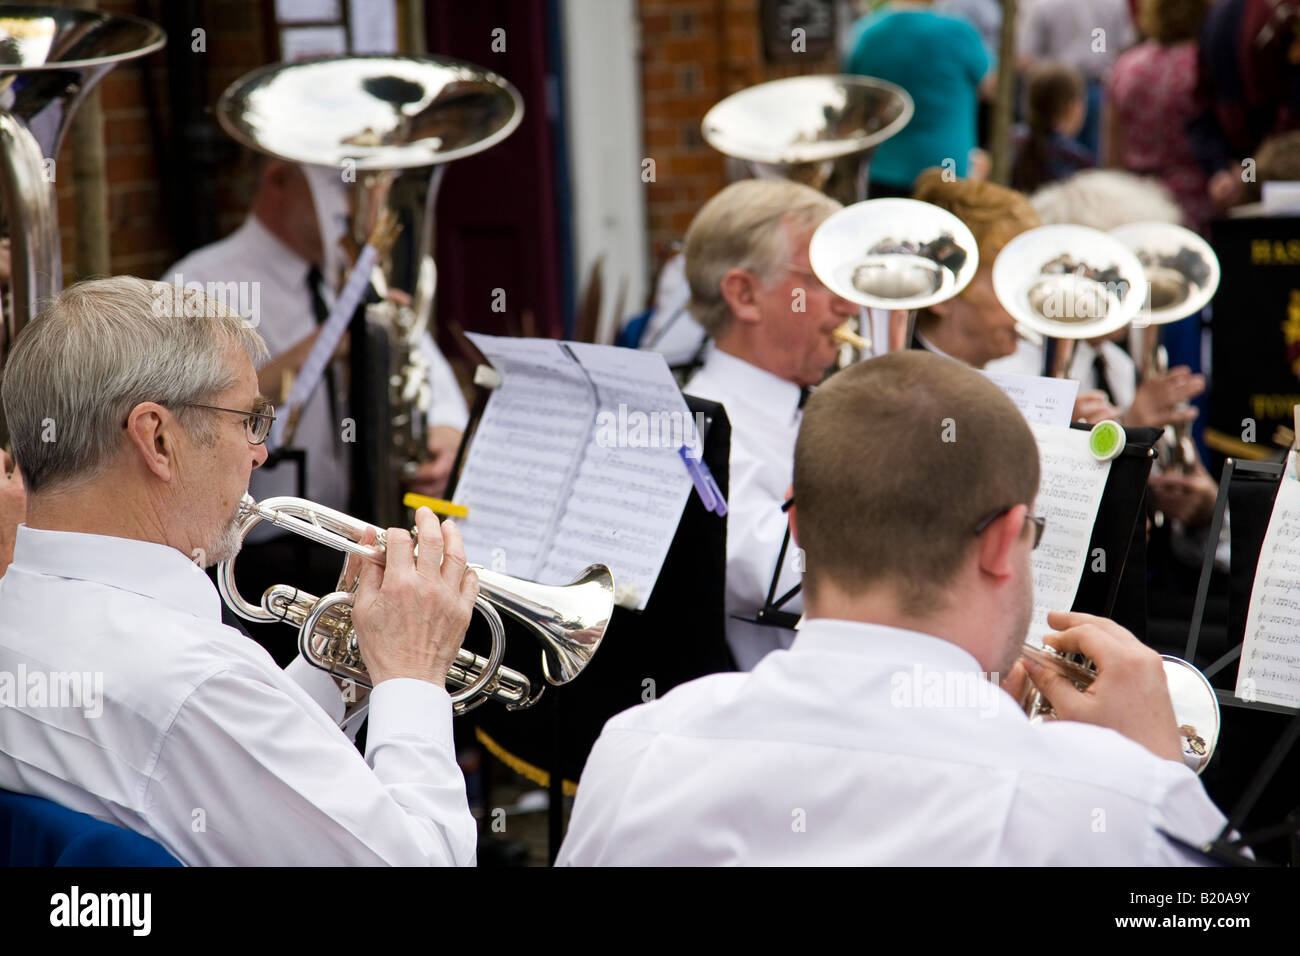 The Haslemere Town Band has its origins around 1837, seen here in action at the 2008 Haslemere Charter Fair, Surrey, England Stock Photo